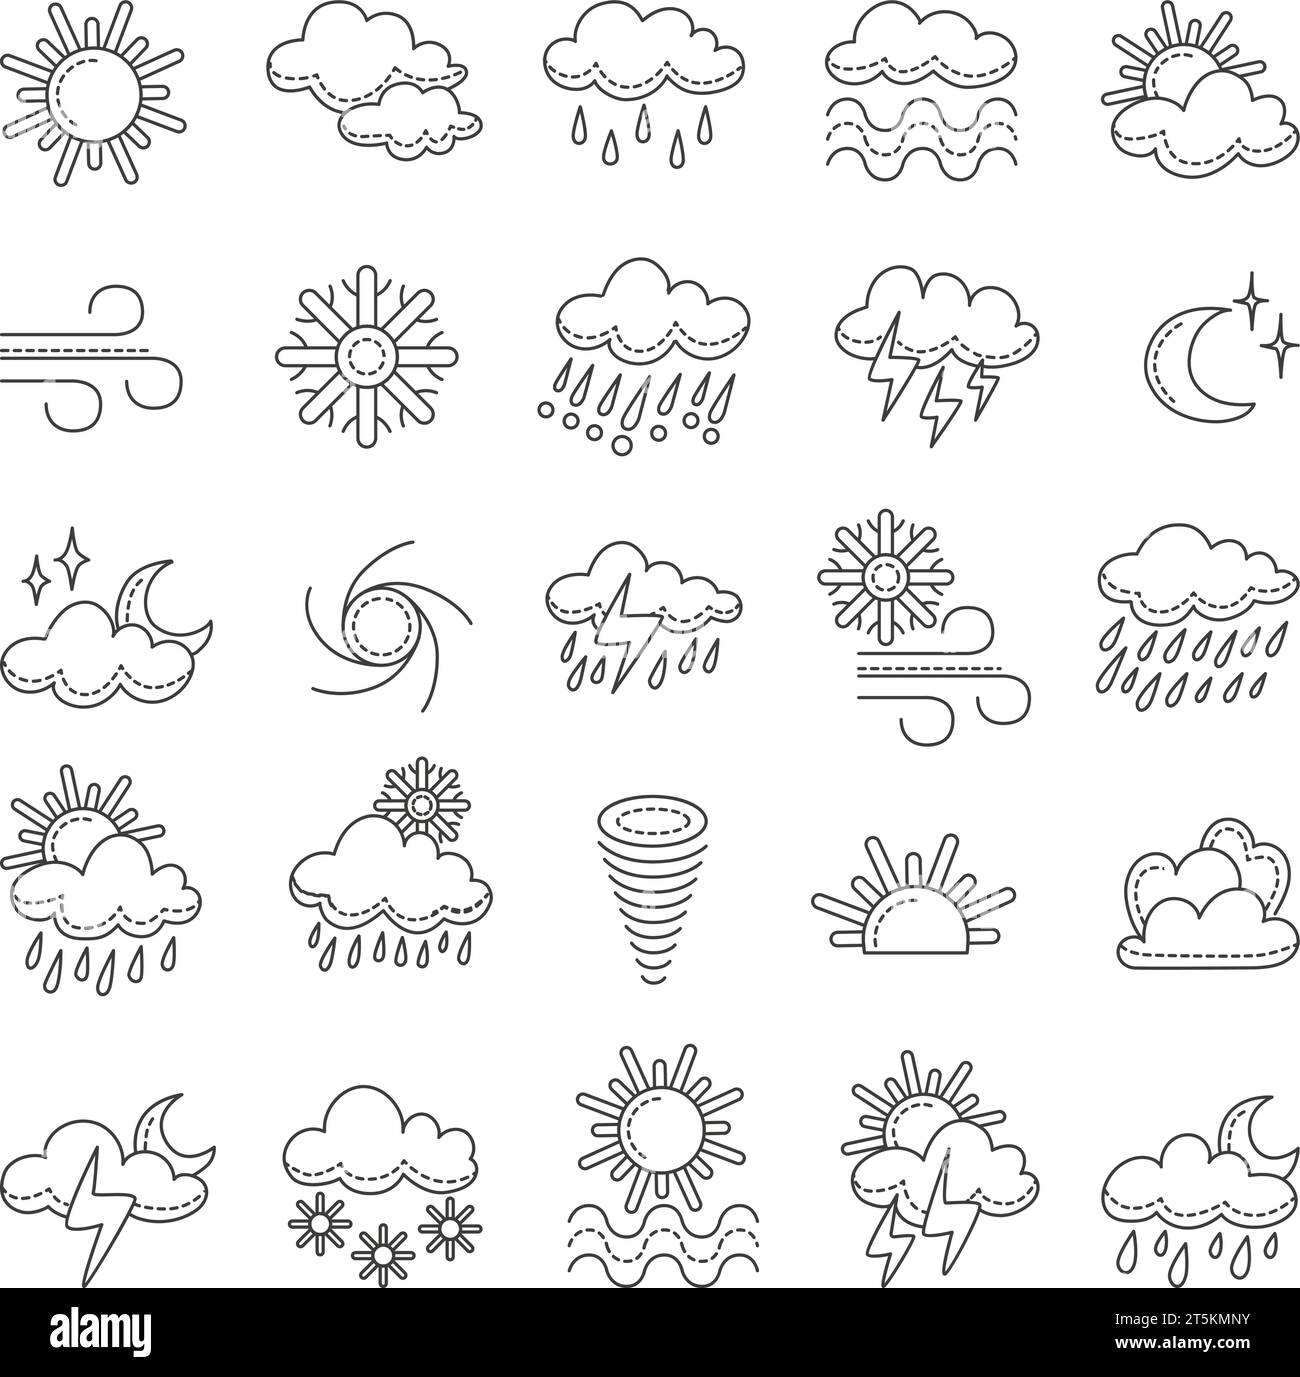 Weather doodle icons, clouds and snow, sun and tornado. Isolated line meteorology symbols, various seasons. Raindrops, lightning, neoteric vector Stock Vector